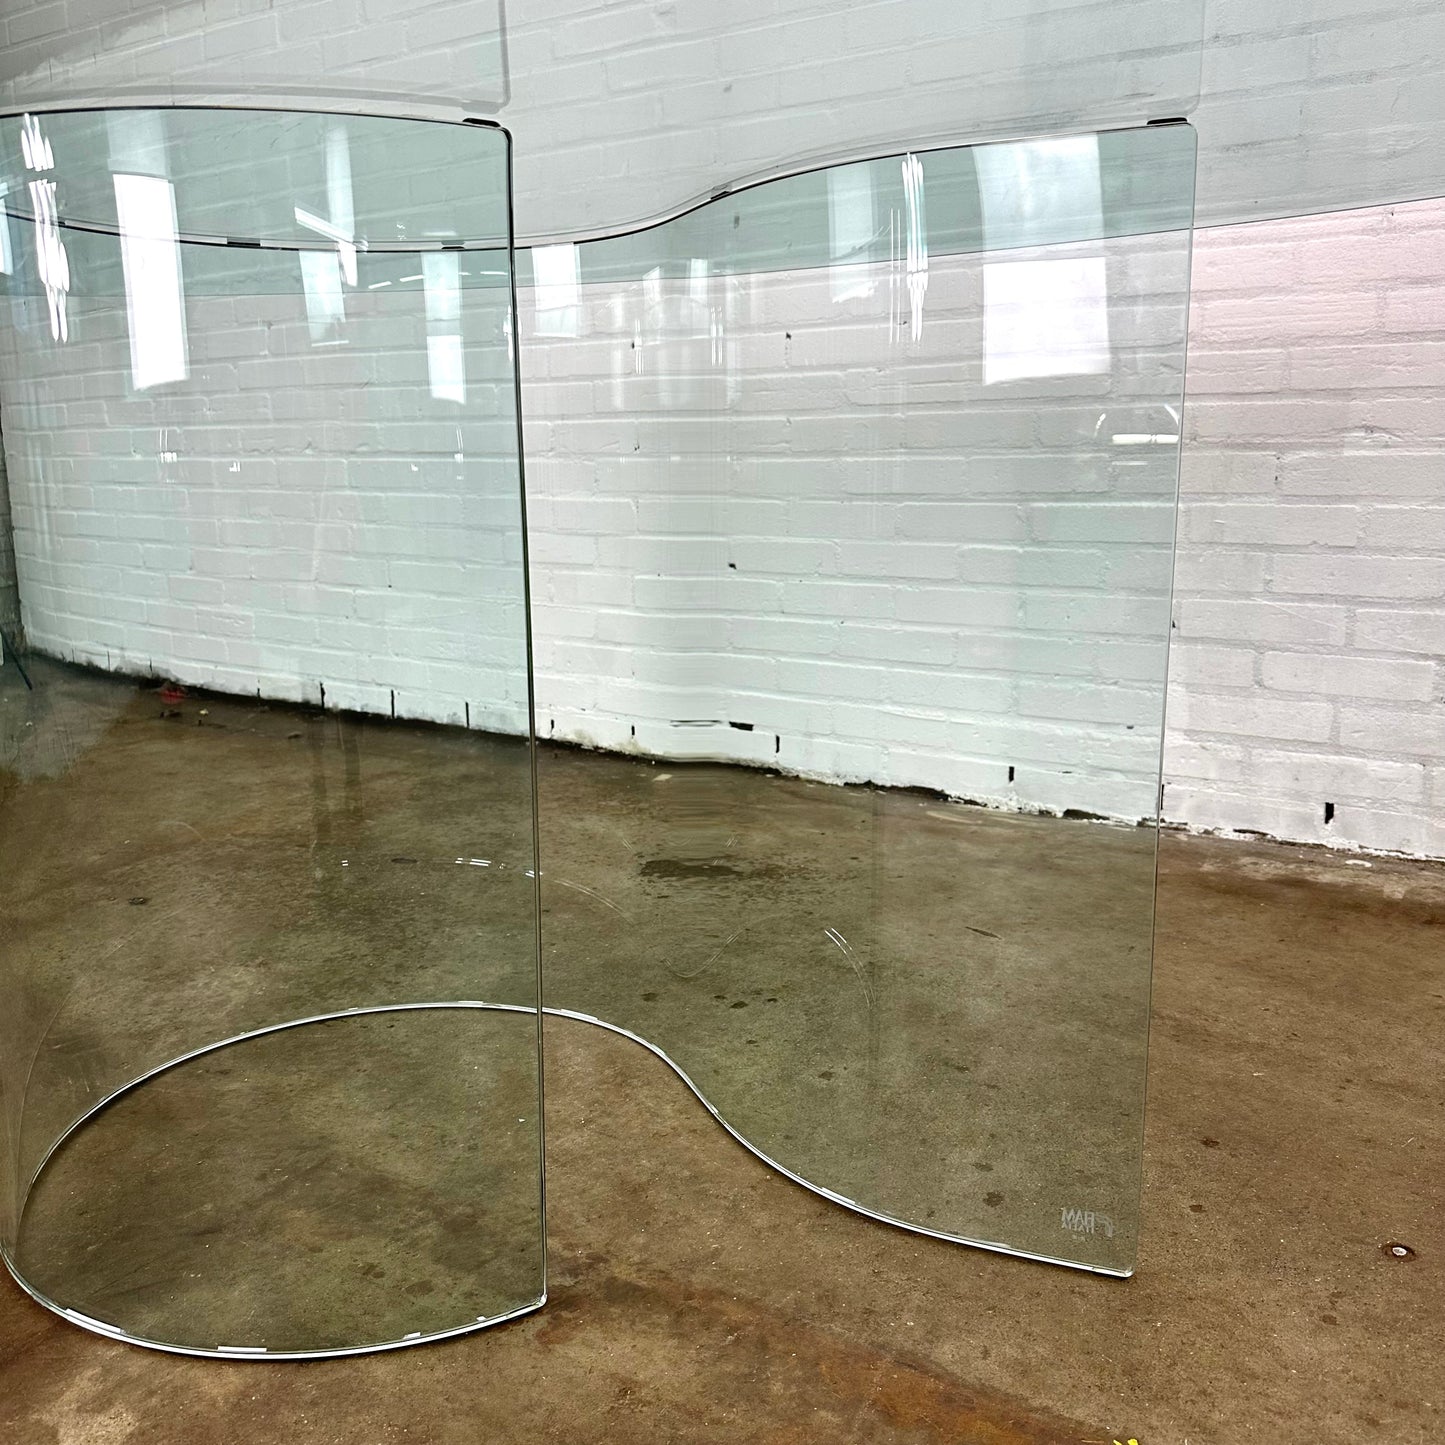 Papiro glass dining table by Fiam Italy